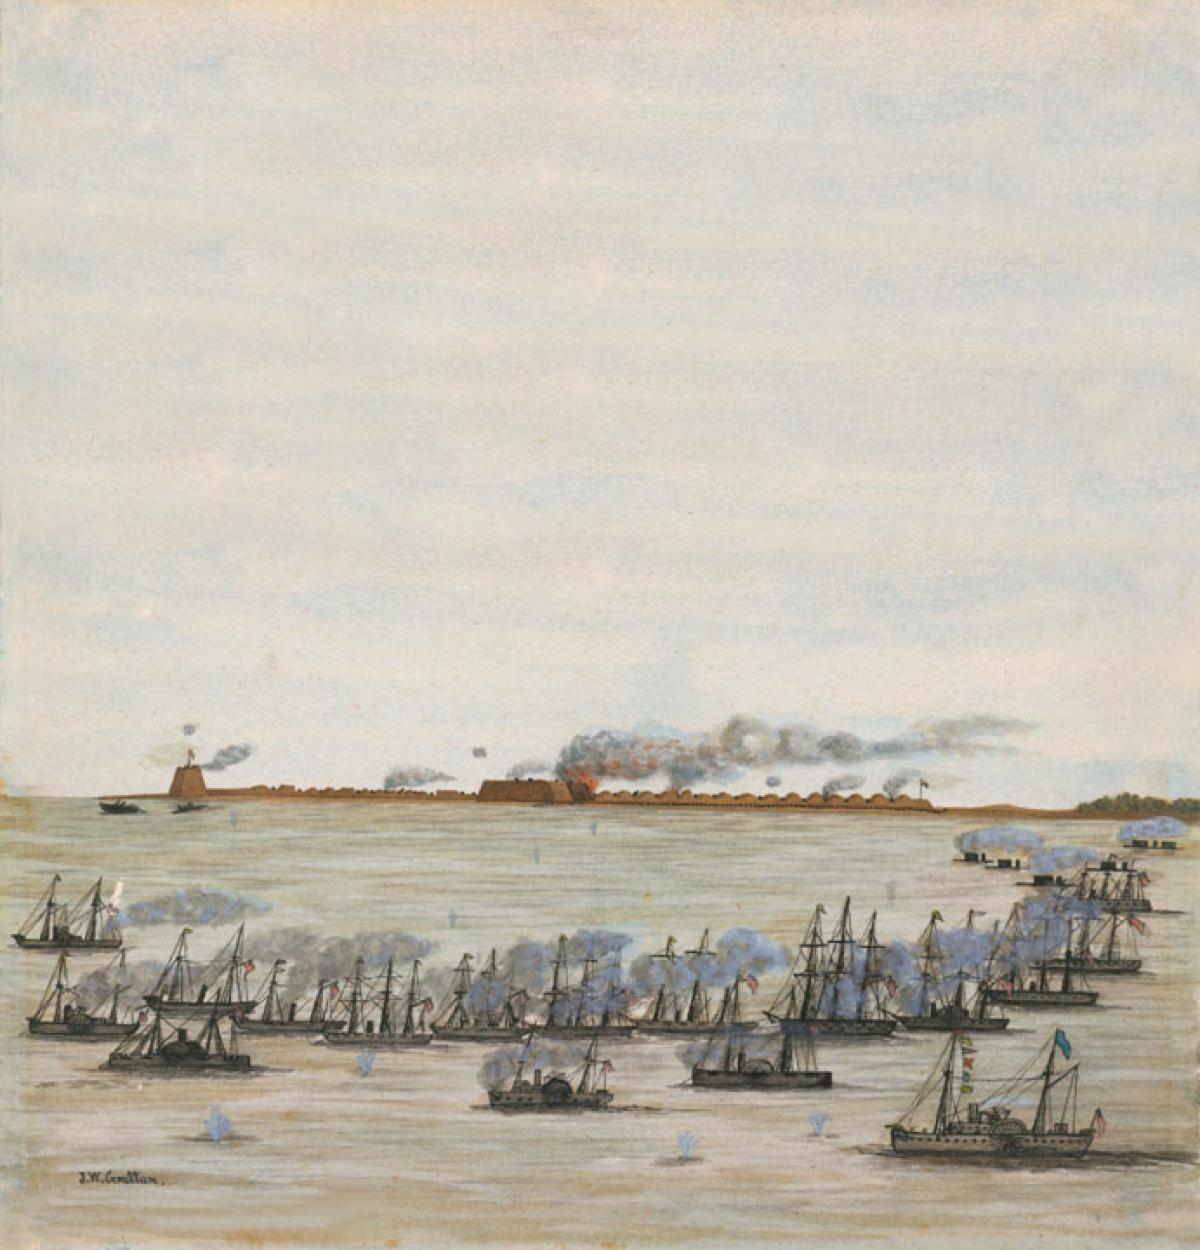 Navy Art Collection, Naval History and Heritage Command